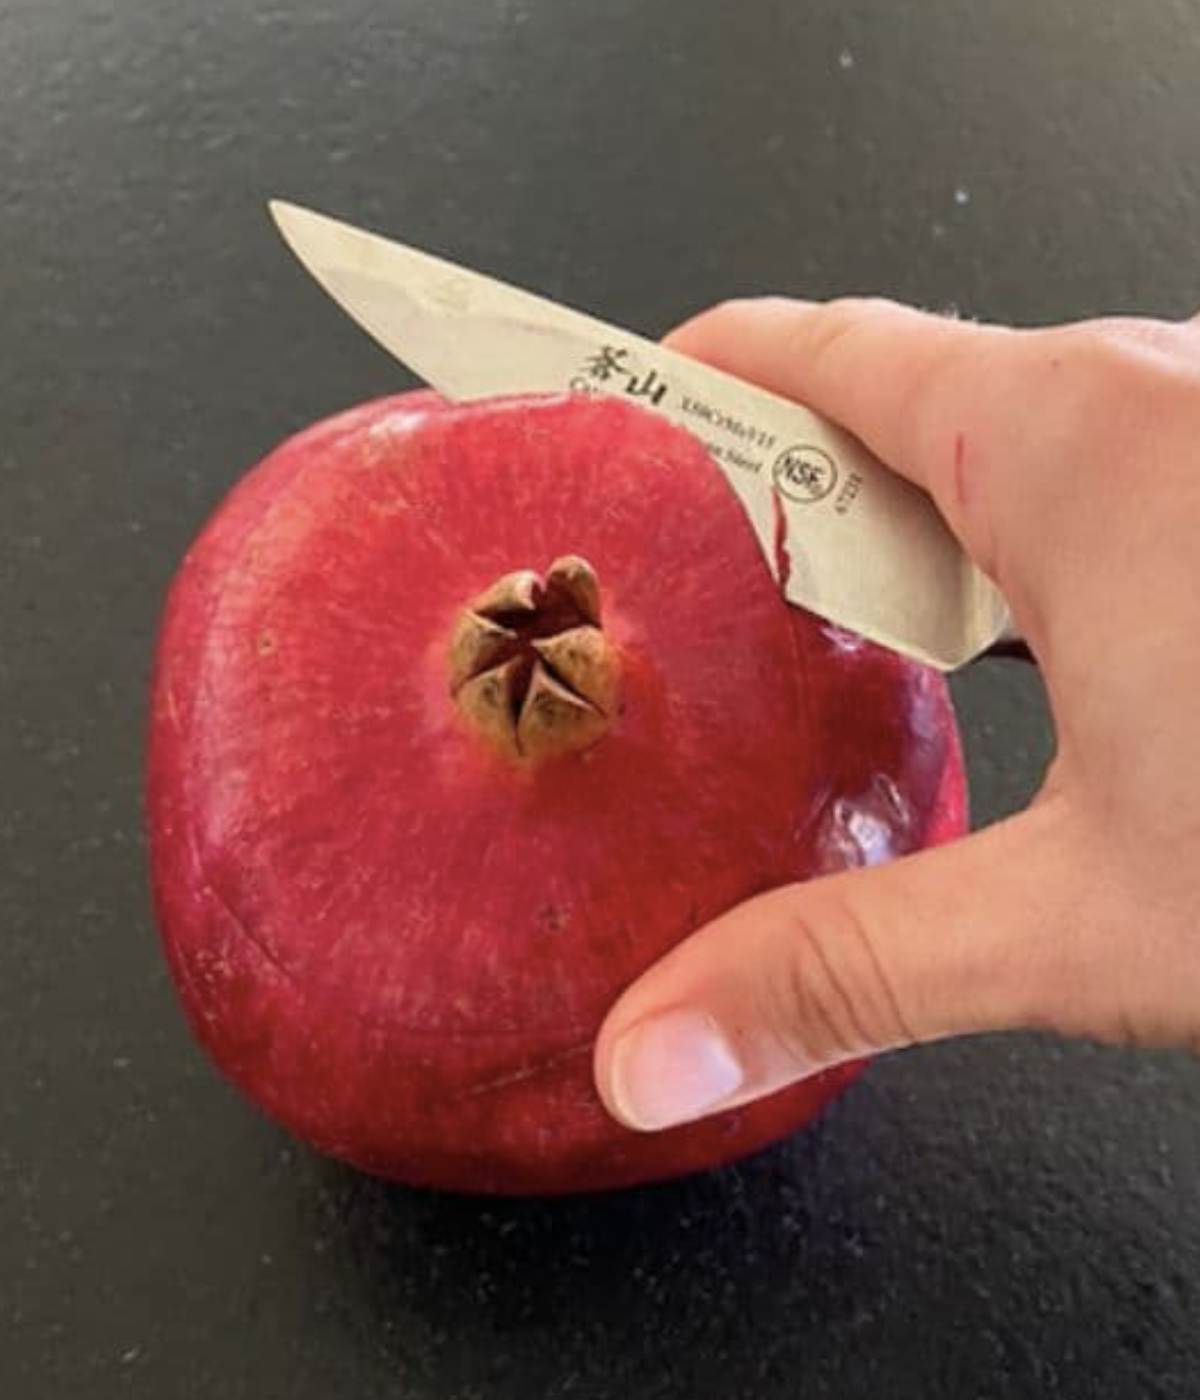 Opening pomegranate top with knife. 